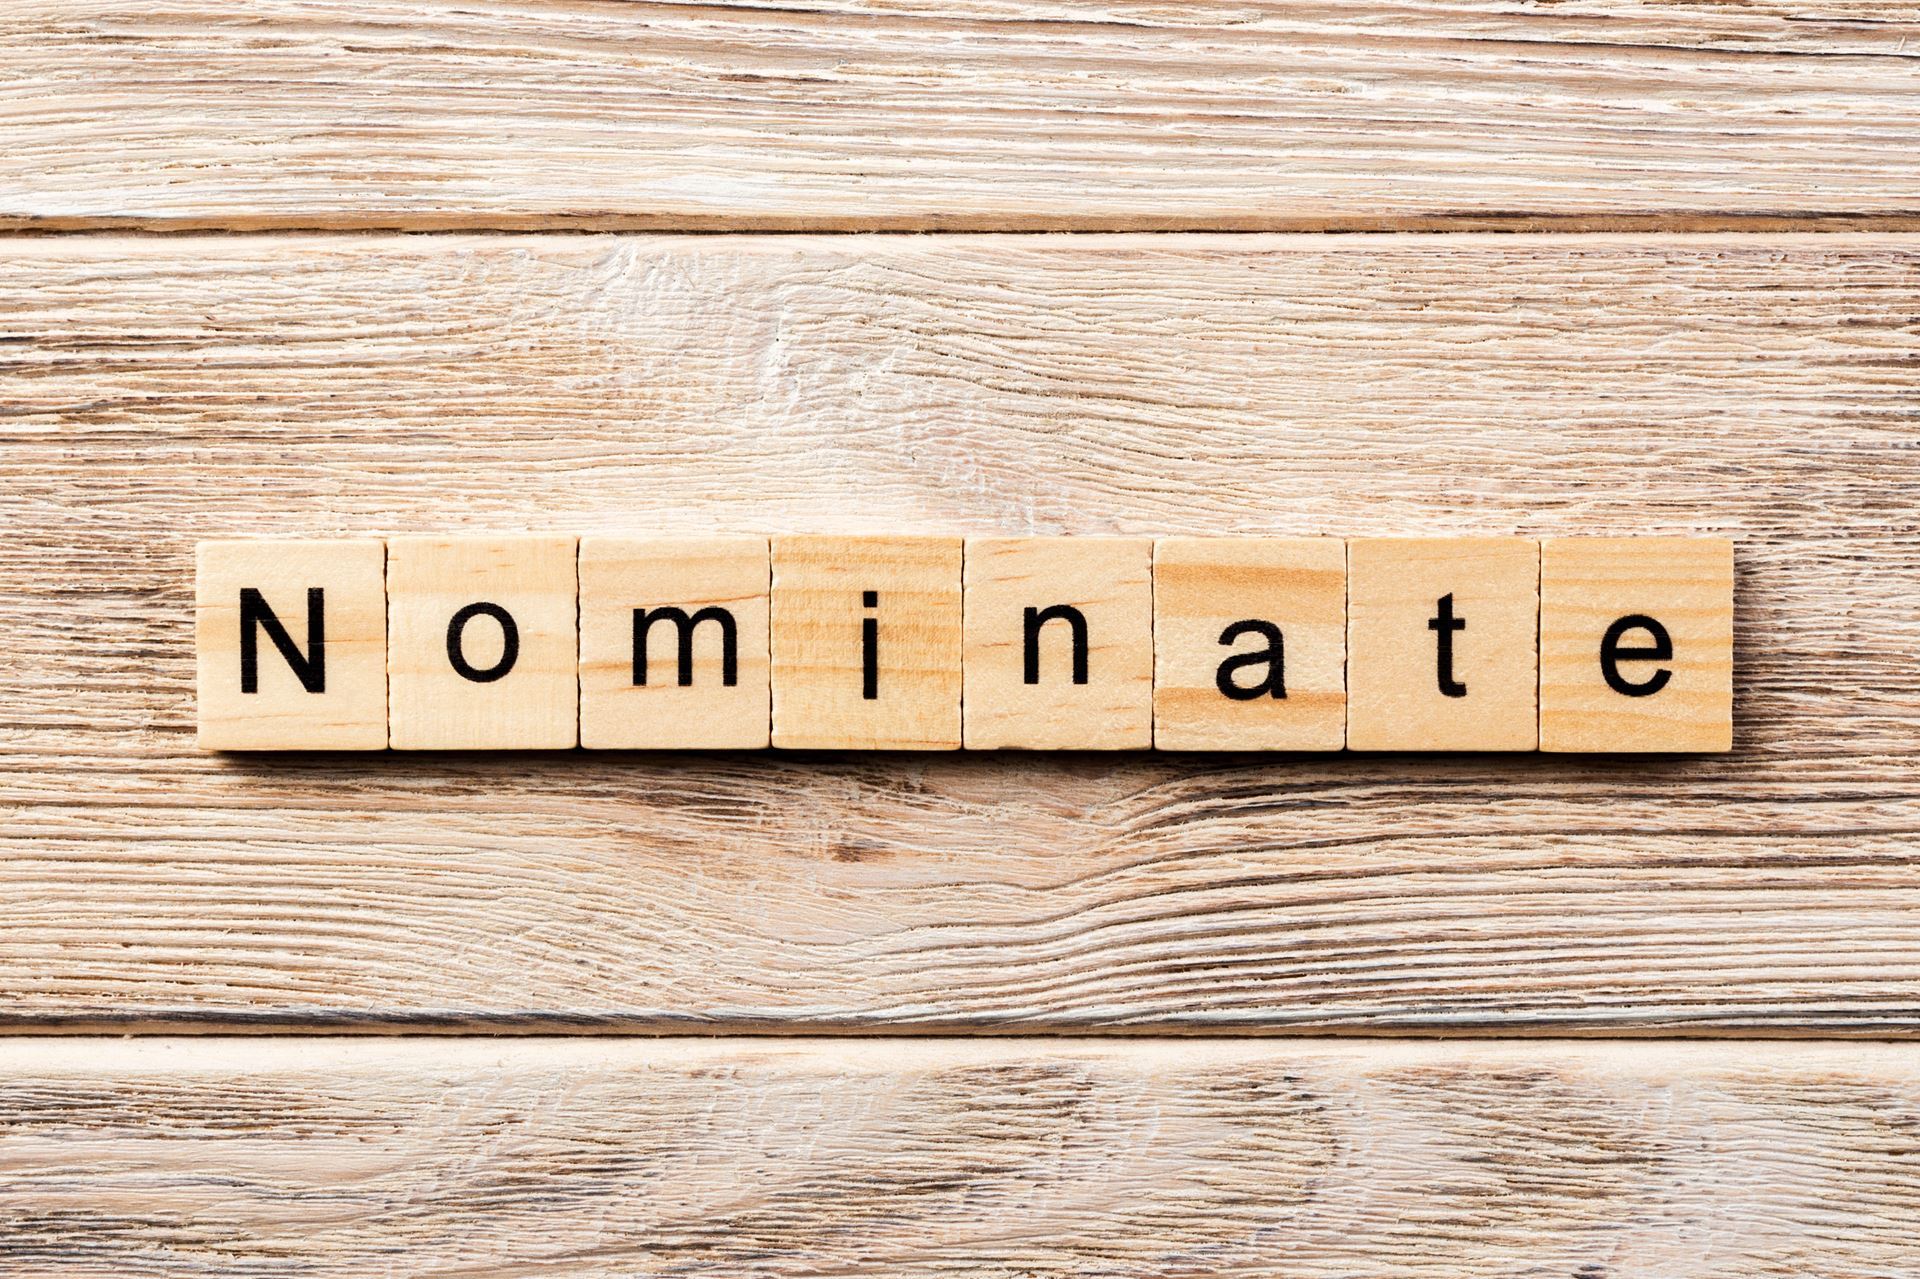 Stock image of scrabble word tiles with the letters to spell nominate. 